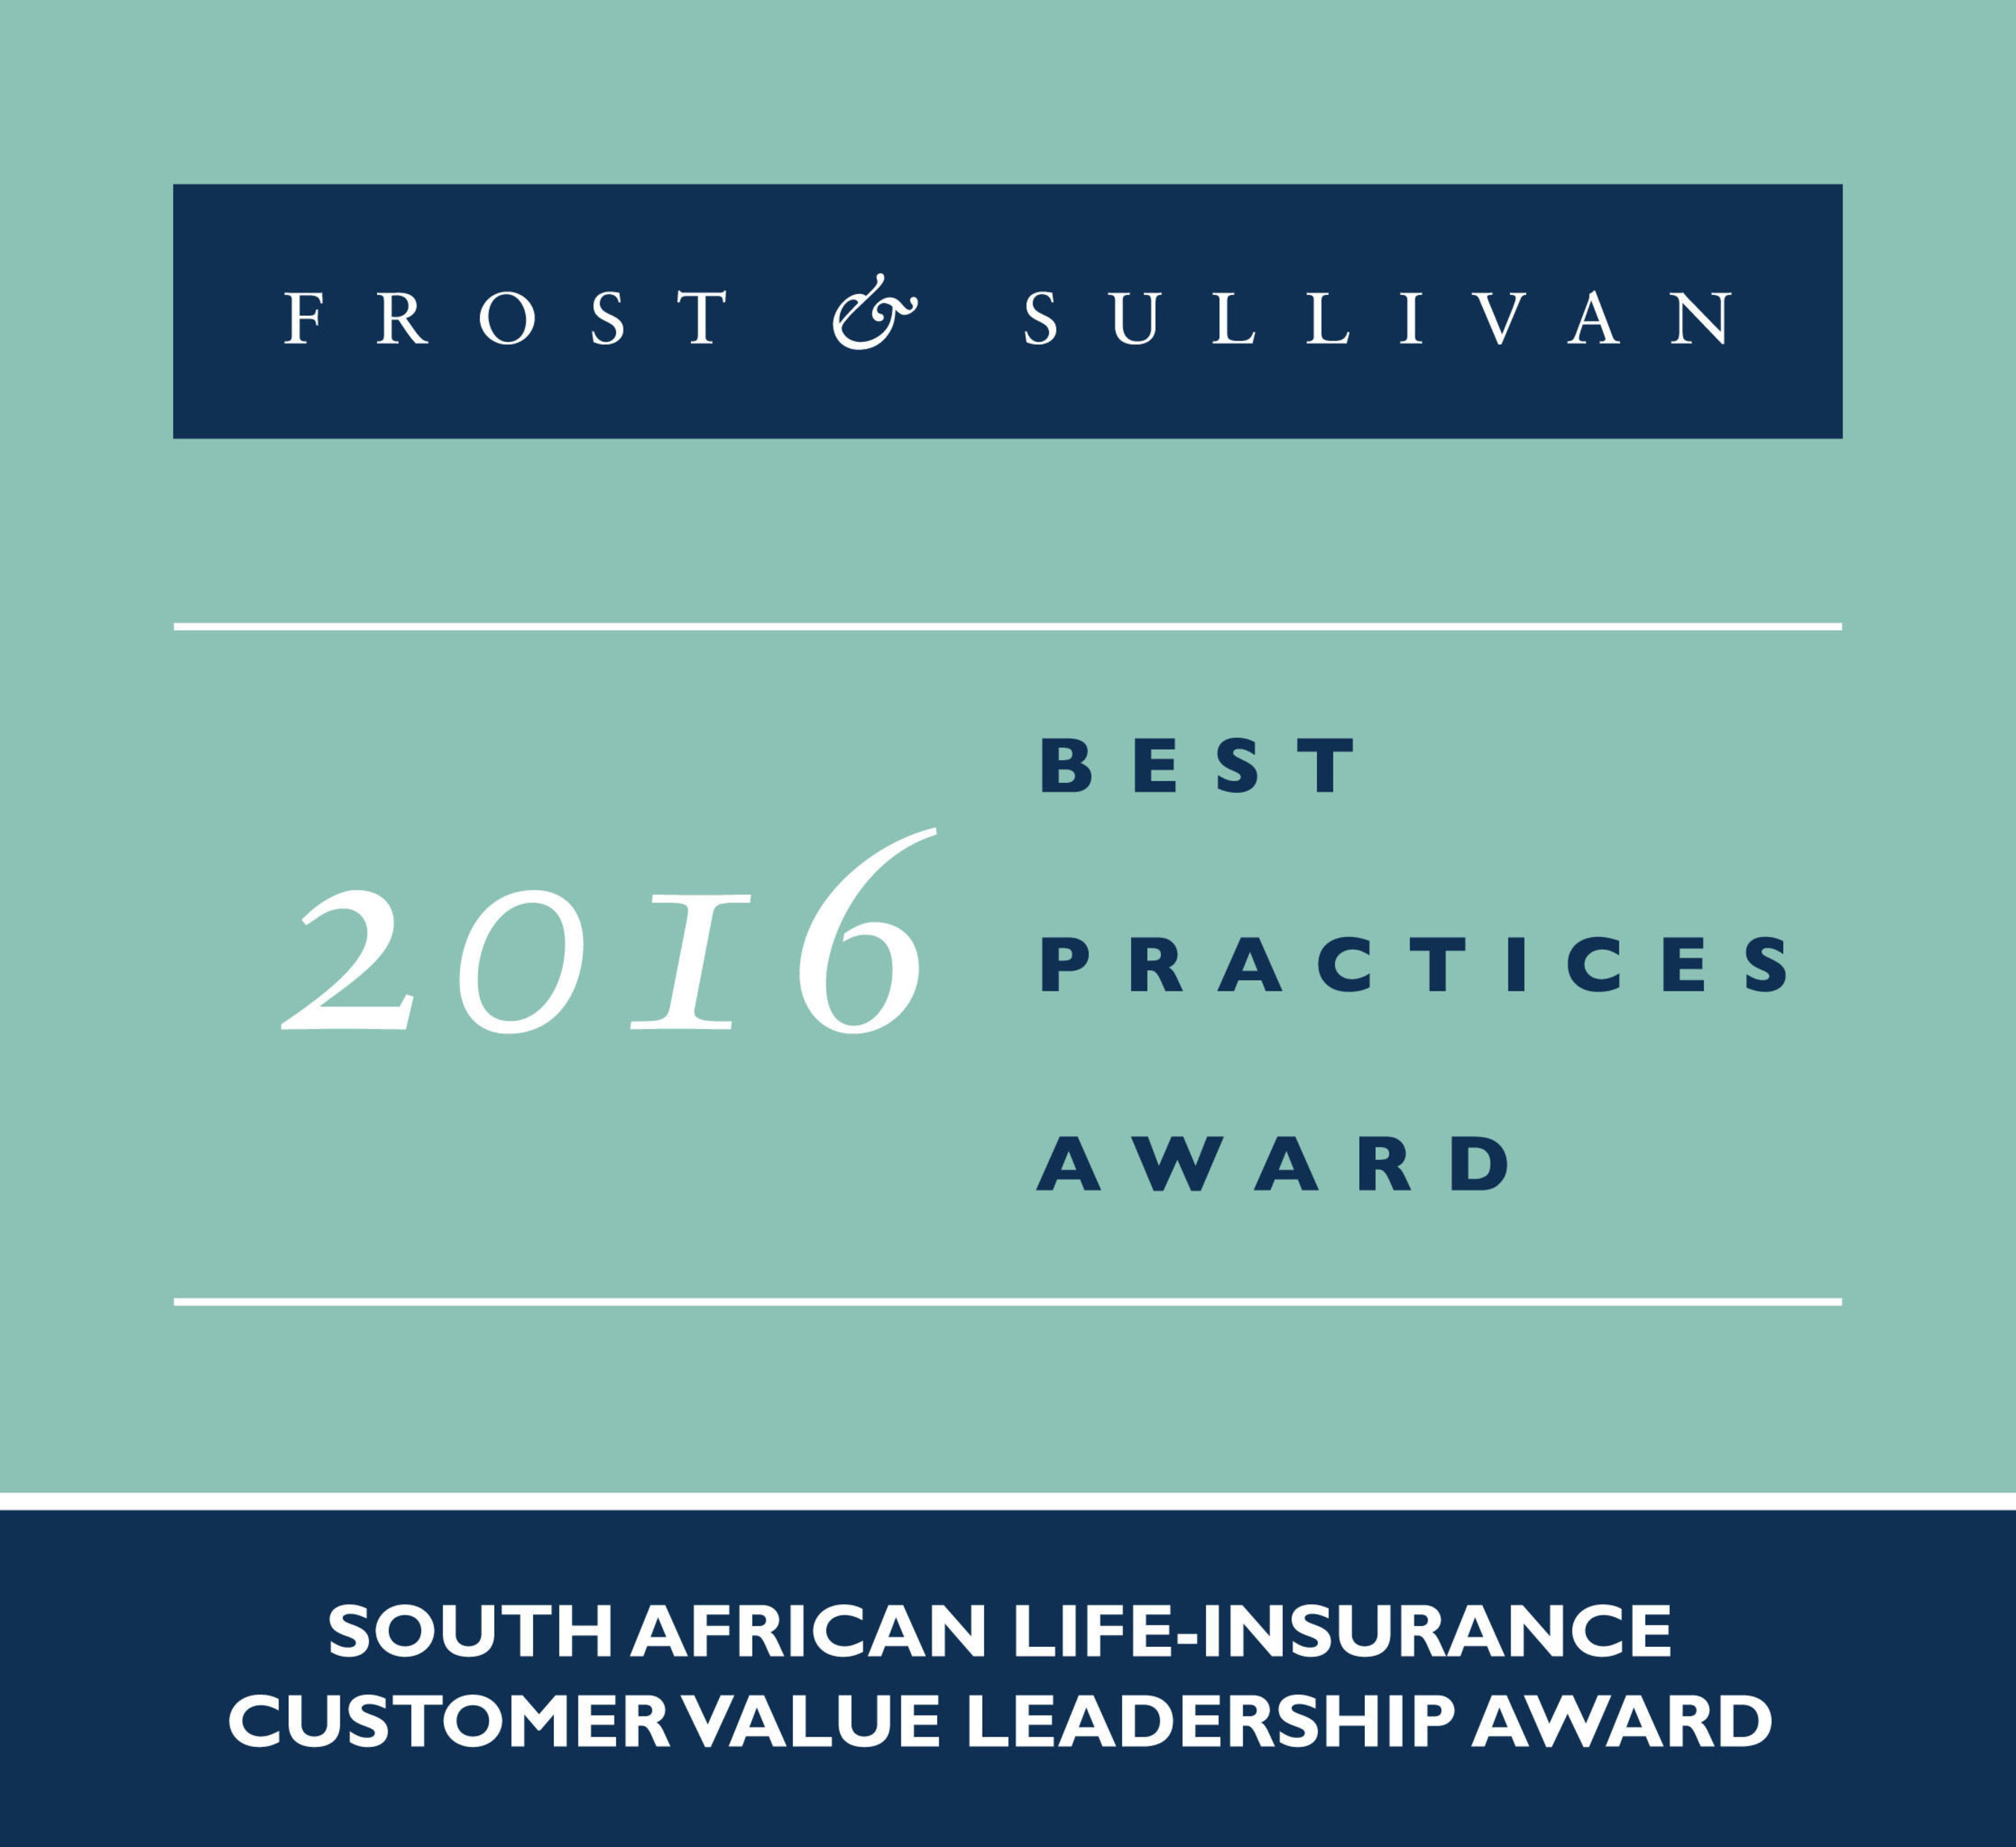 Instant Life Revives 2016 South African Life-Insurance Customer Value Leadership Award